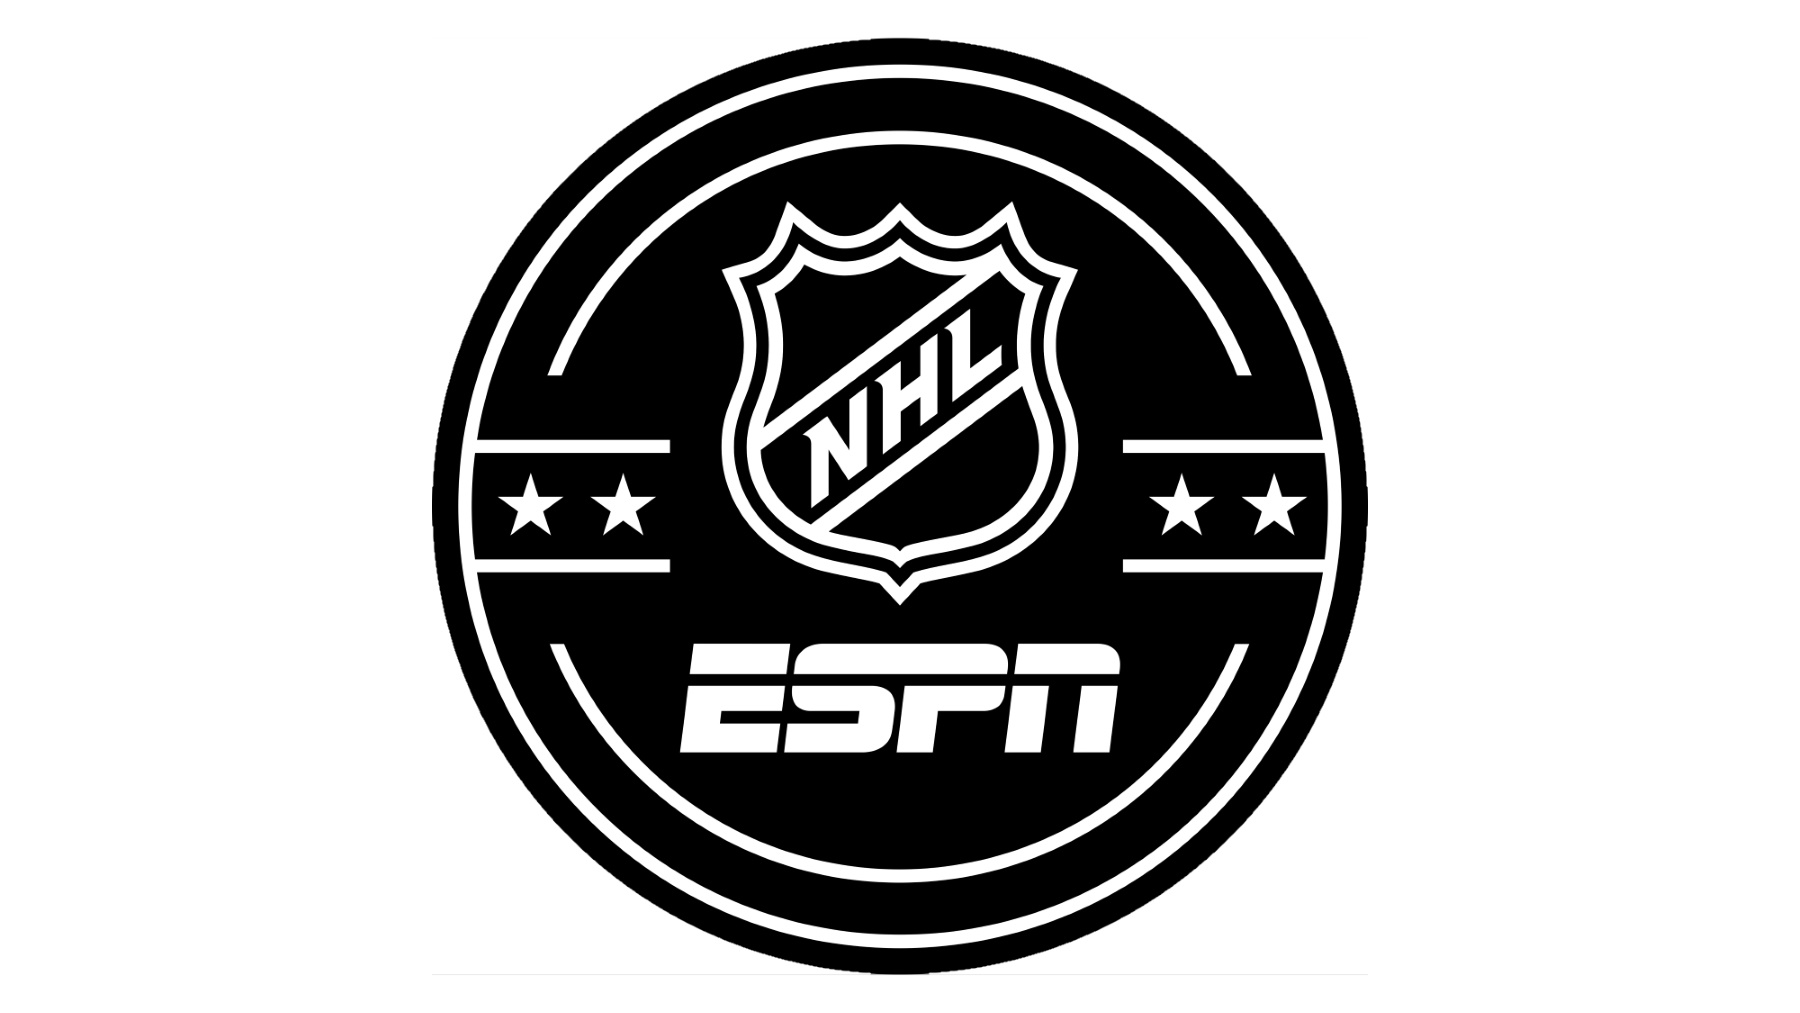 Quest for the Stanley Cup: How to watch, plus episode guide - ESPN